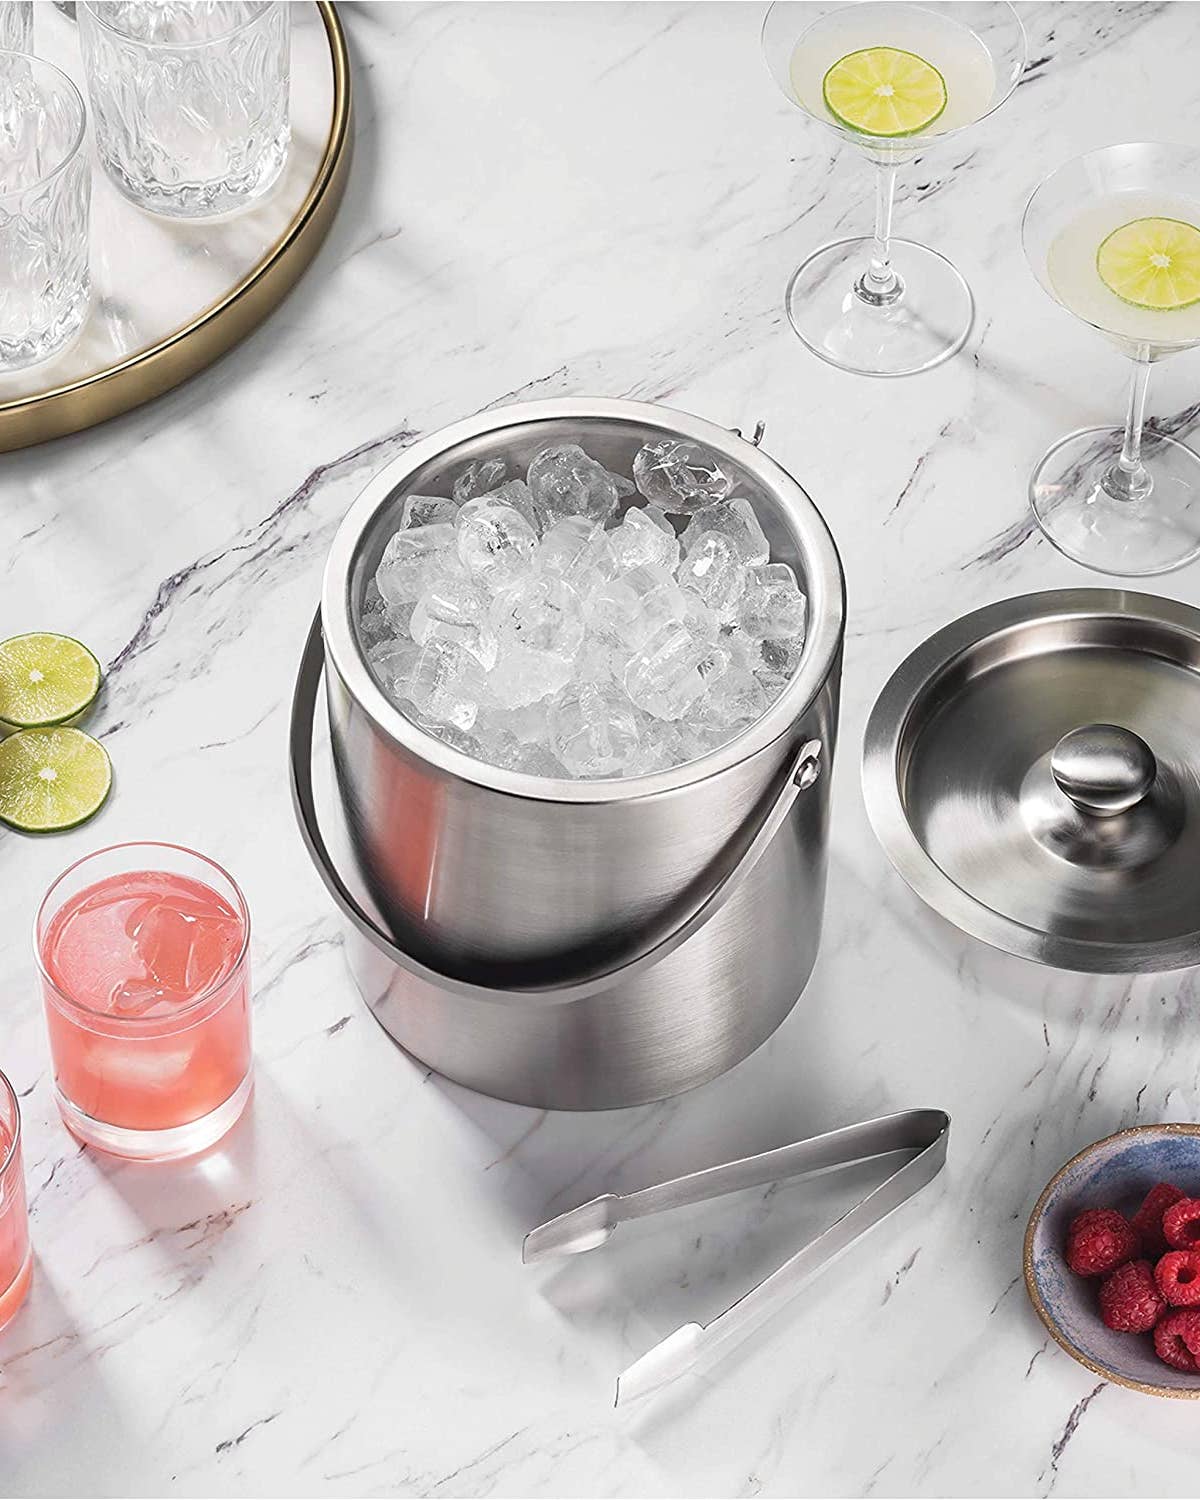 That Special Bottle of Wine Deserves the Best Ice Bucket